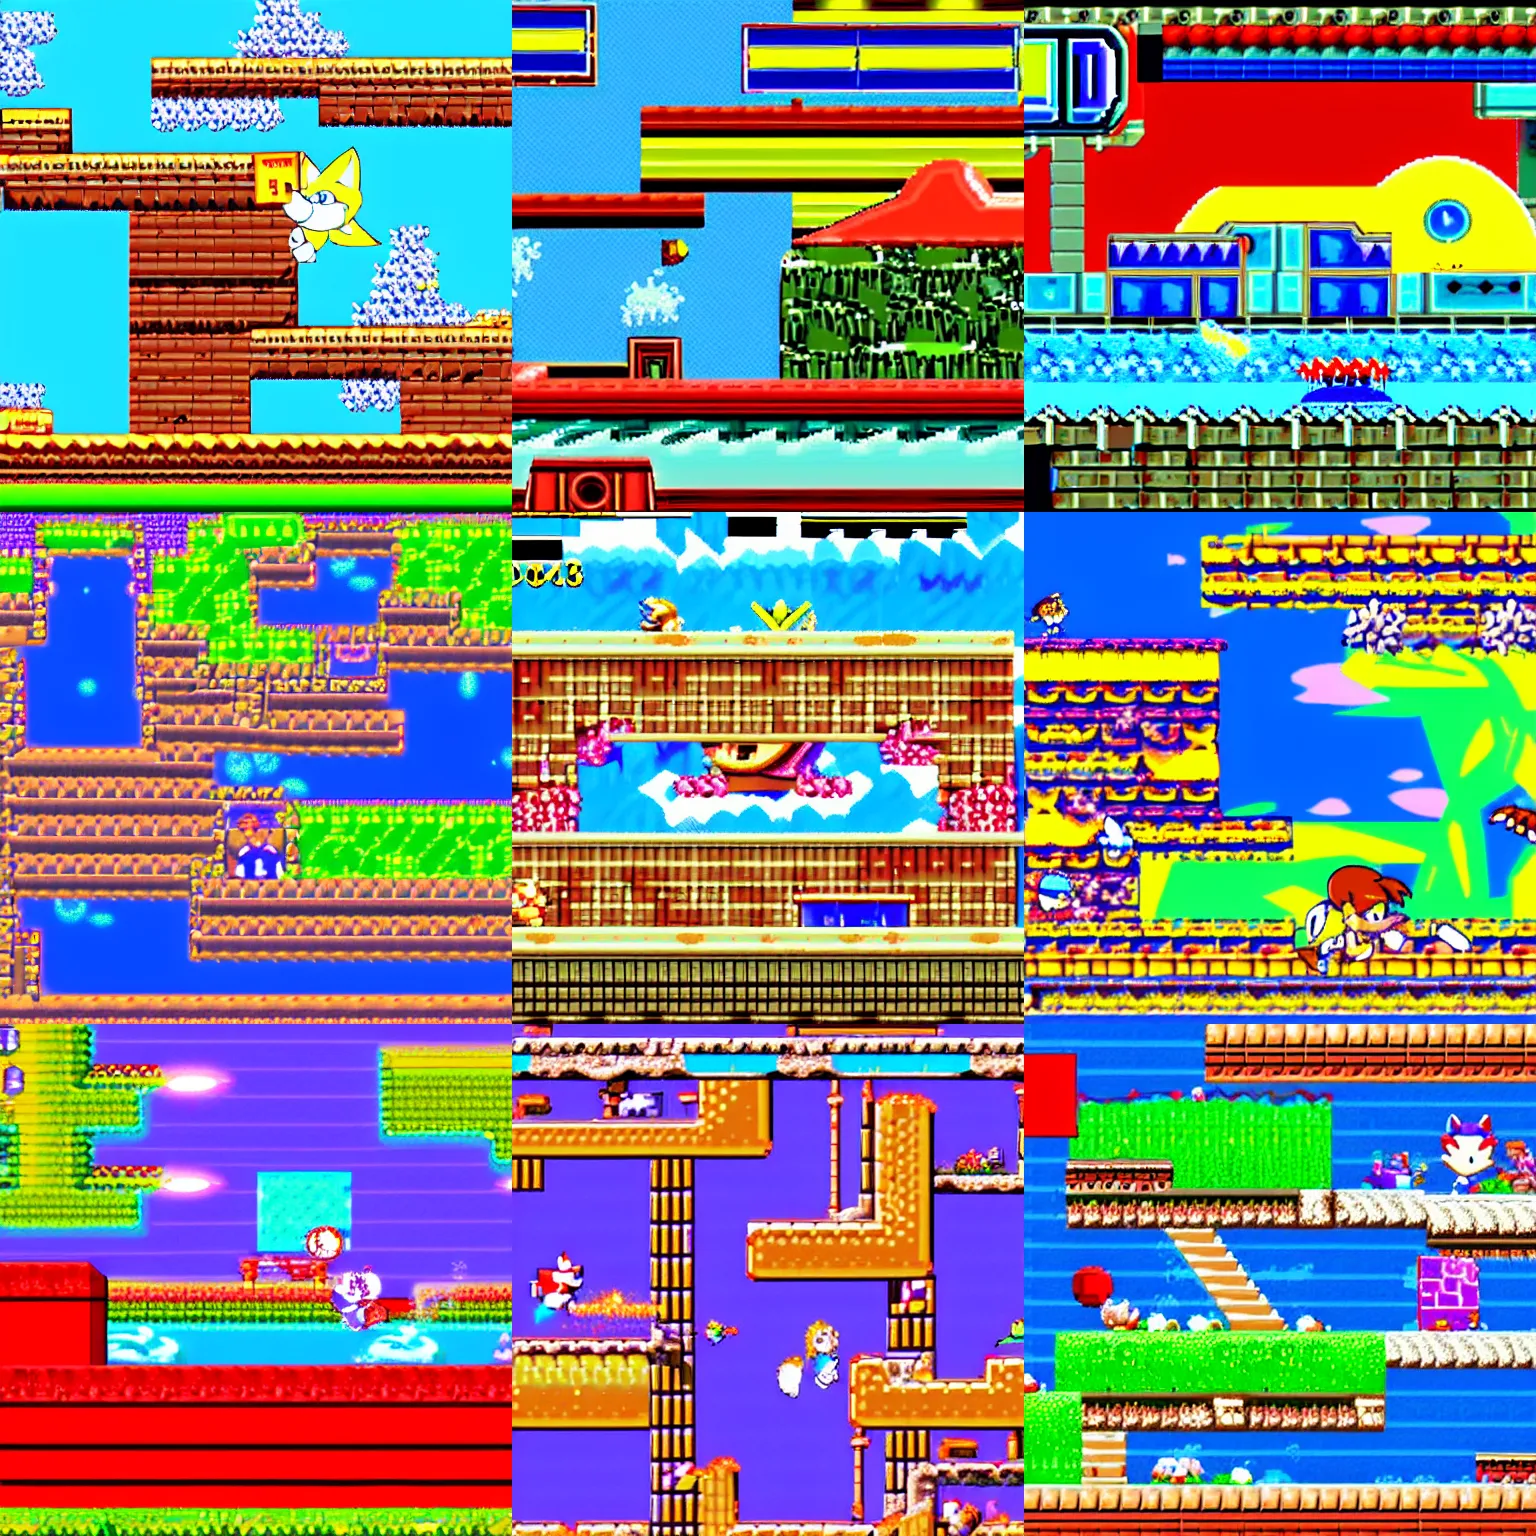 Prompt: screenshot of the Hot Spring Zone from Sonic the Hedgehog 2, gameplay clip